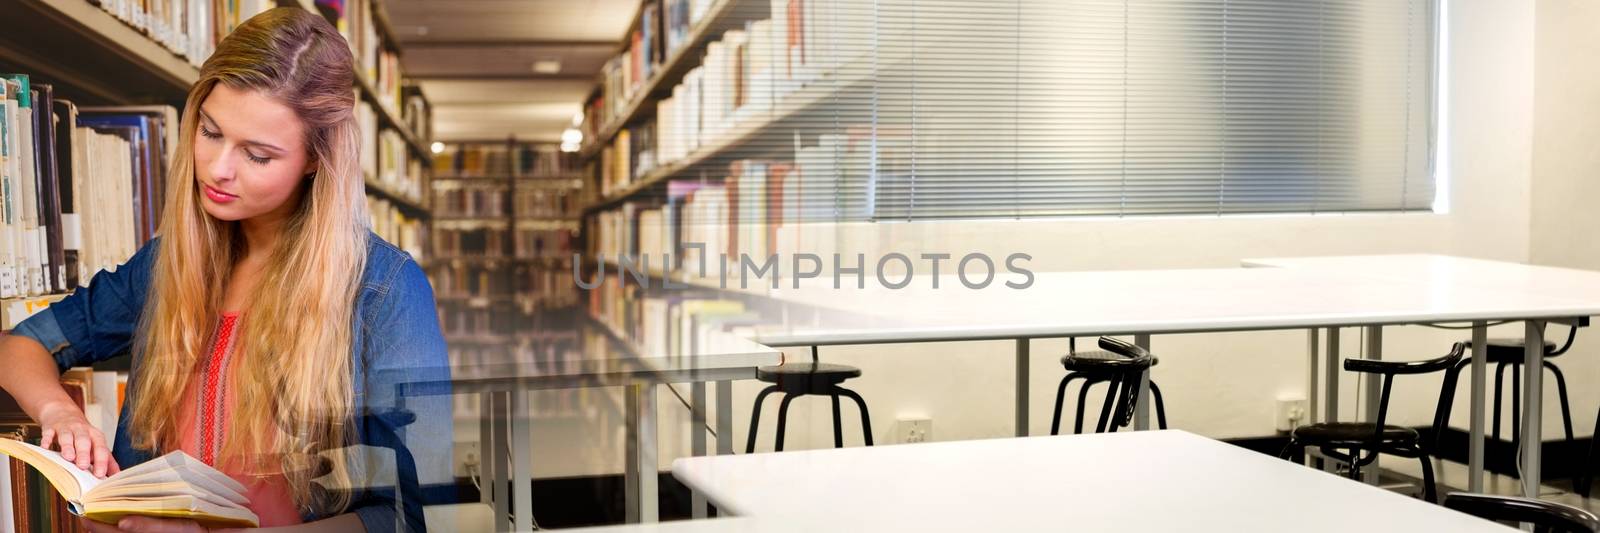 Digital composite of Student woman in education library with transition